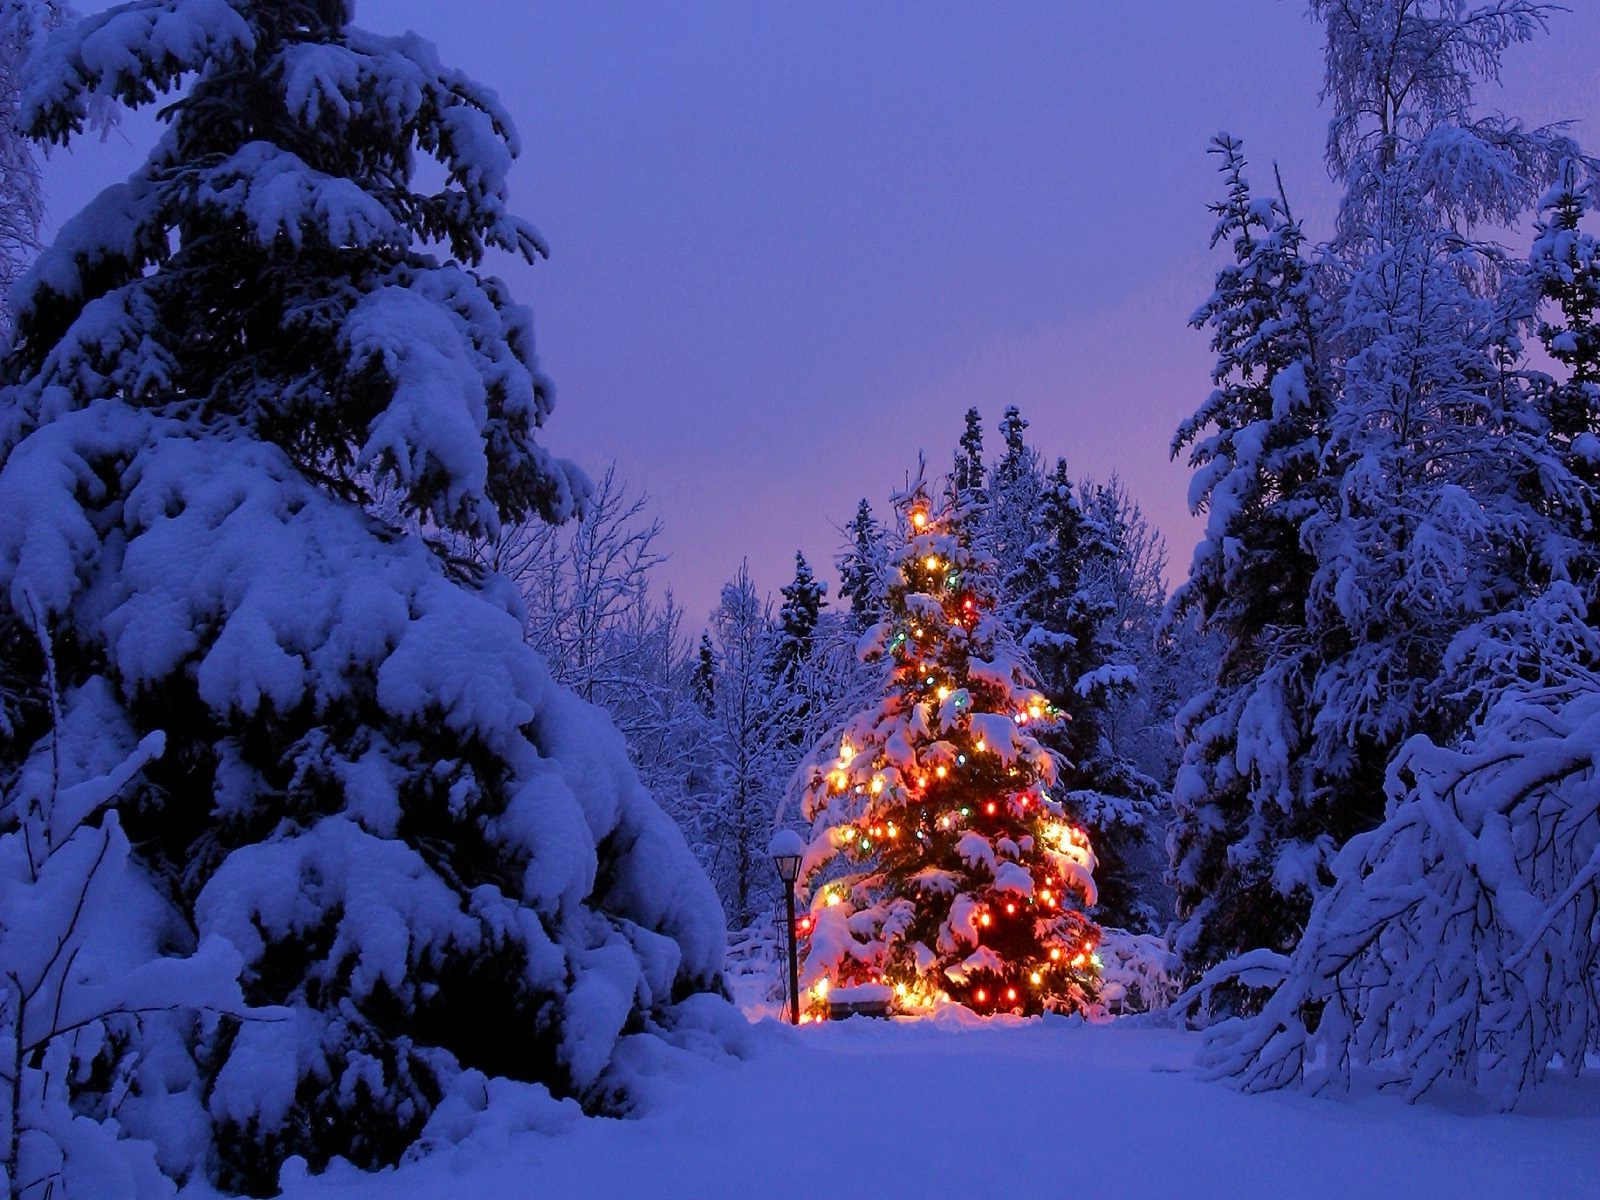 Wallpaper, landscape, night, nature, sky, snow, winter, branch, ice, evening, frost, Christmas Tree, holiday, christmas lights, Freezing, conifer, Evergreen, light, tree, mountain, 1600x1200 px, computer wallpaper, woody plant, christmas decoration